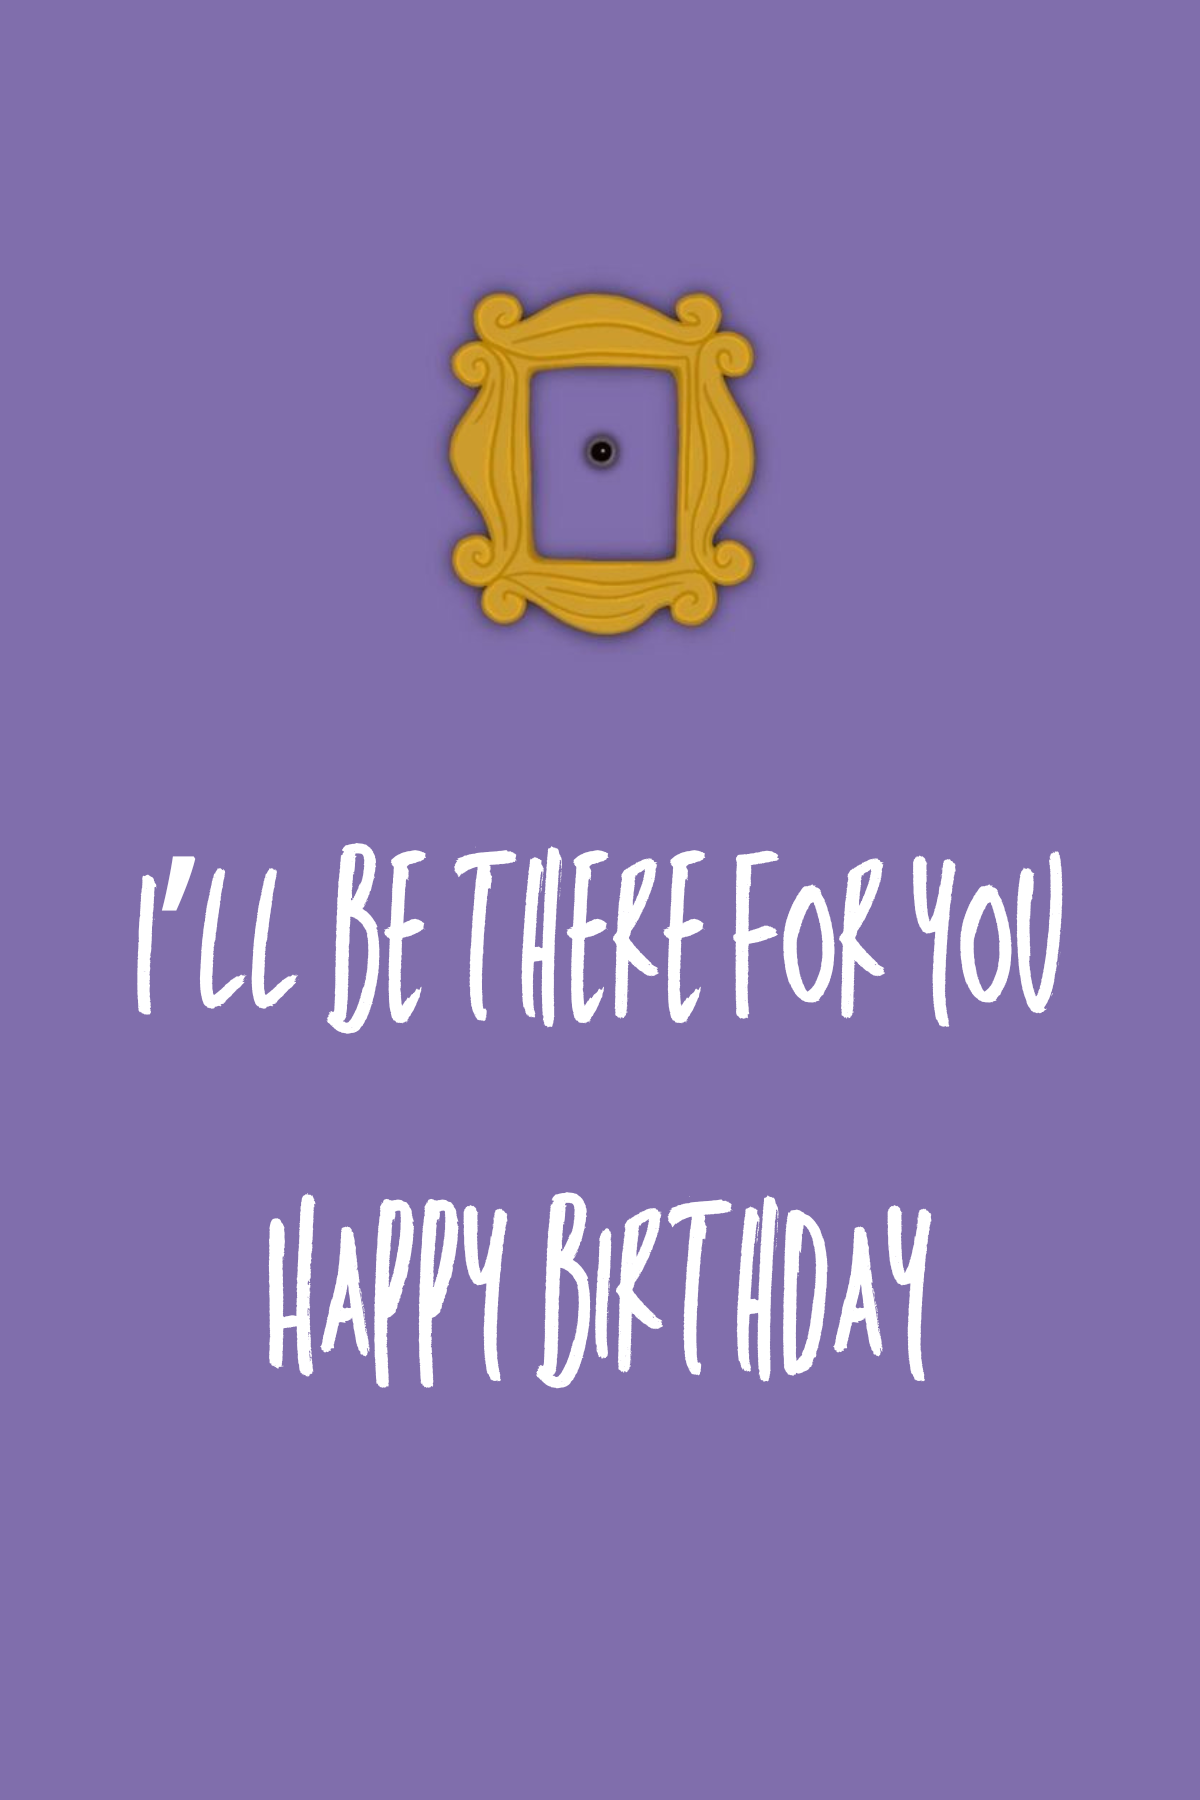 Birthday Cards - I’ll be there for you